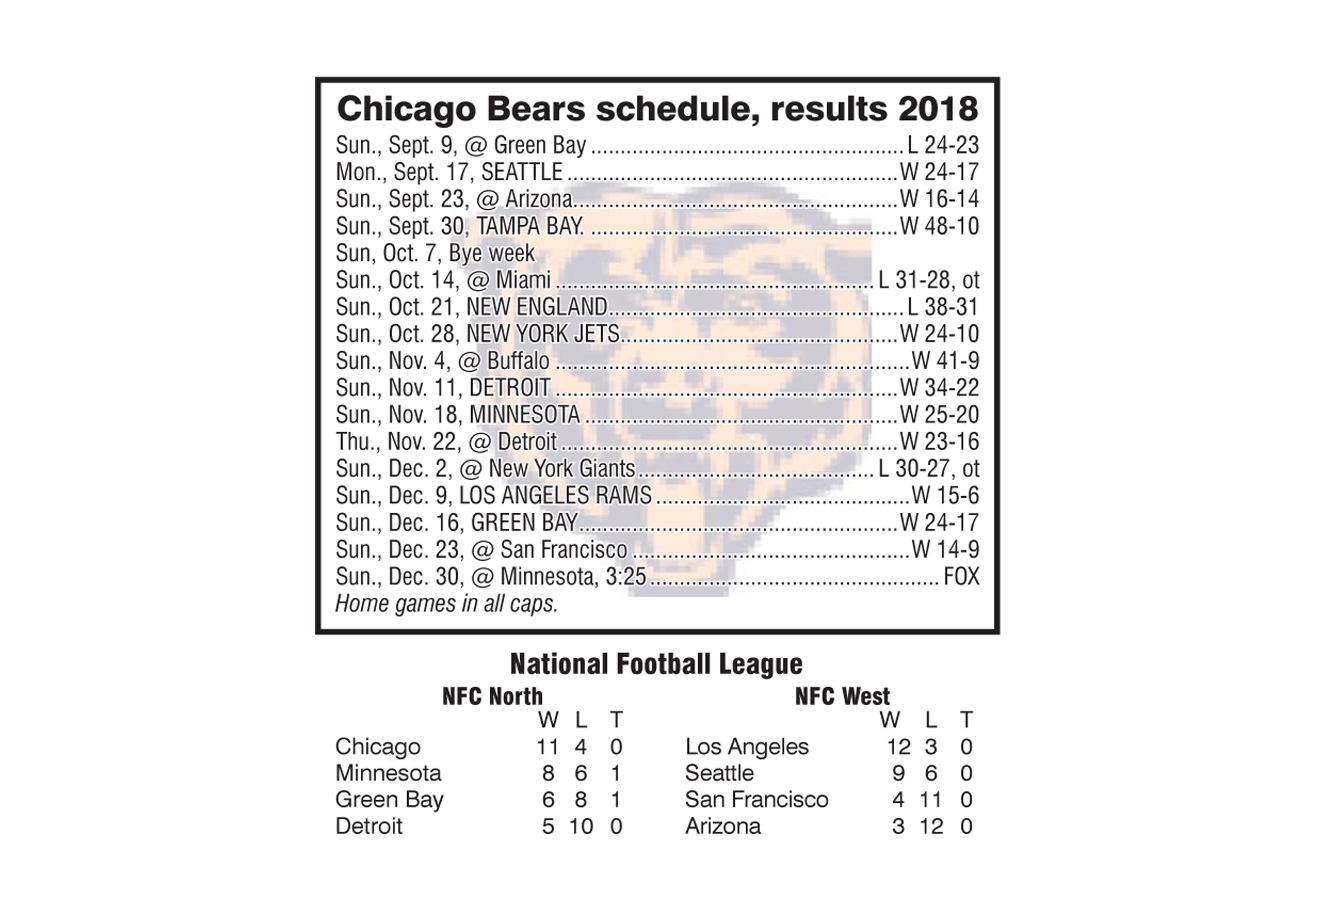 Bears Schedule and Results 2018